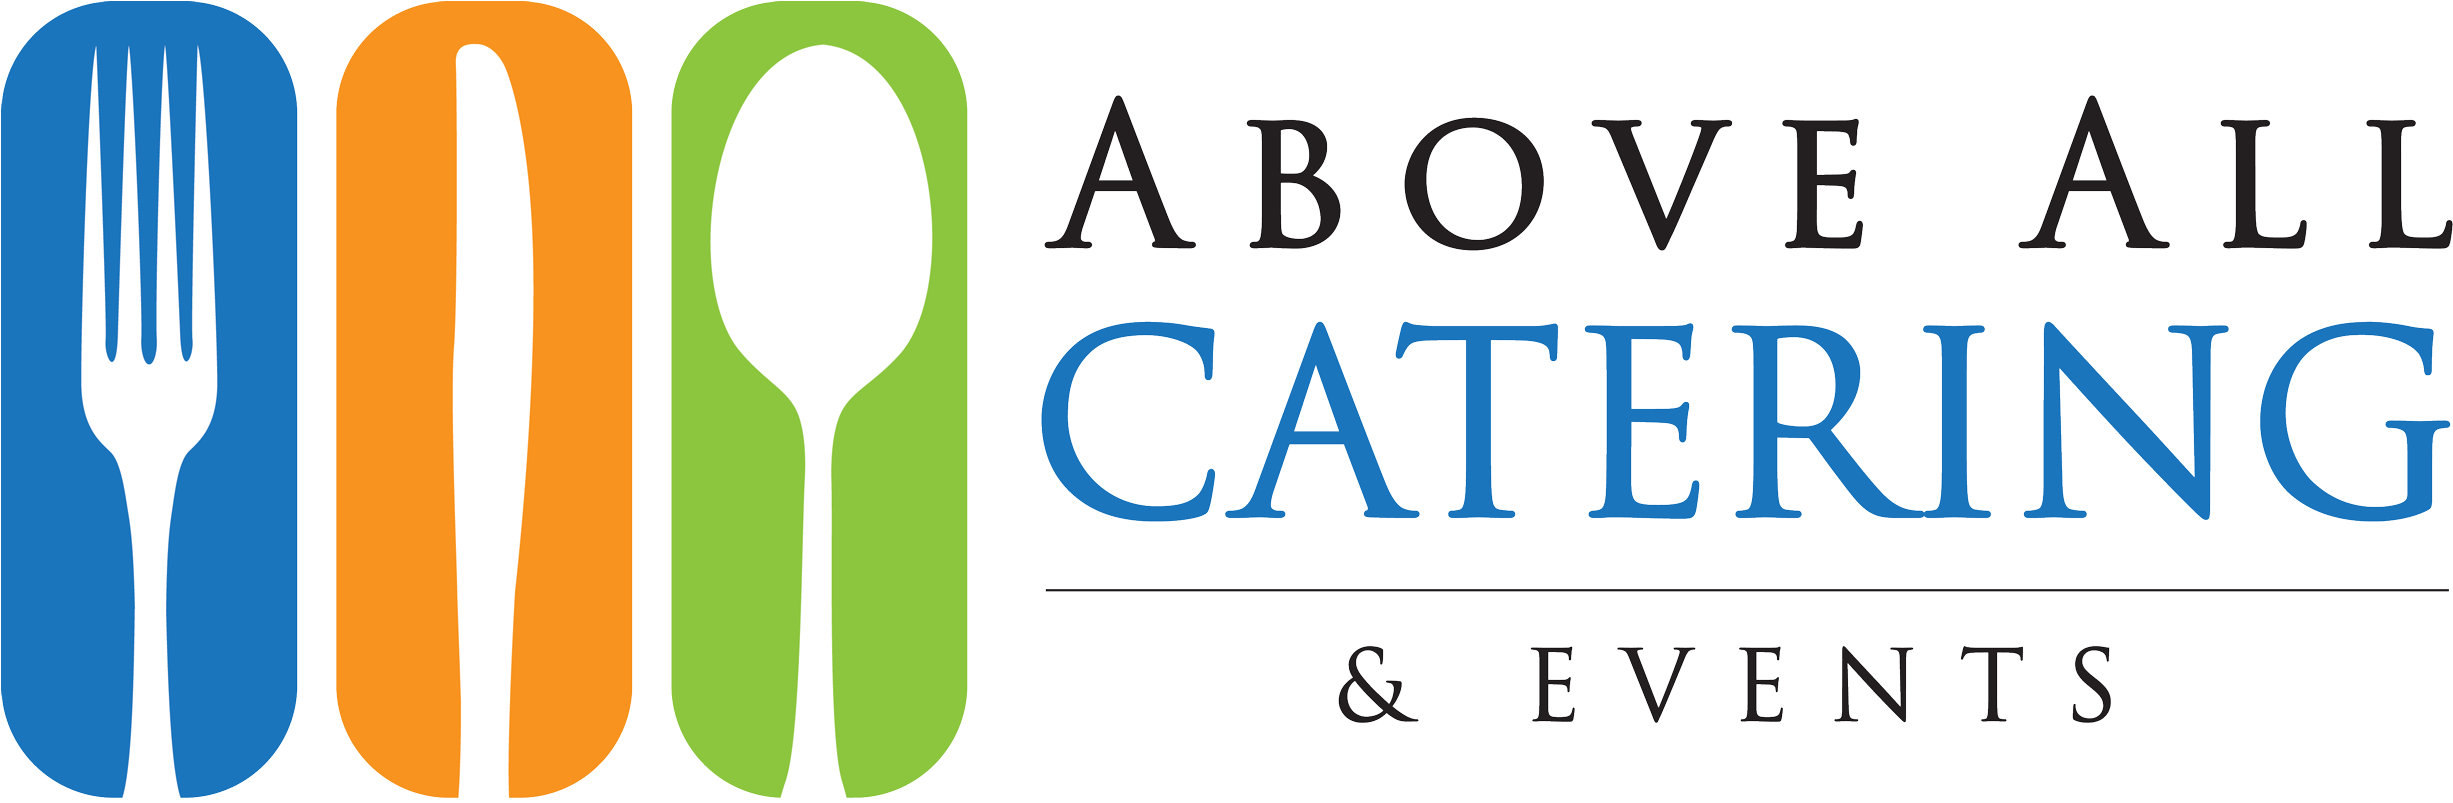 Above All Catering & Events - Catering (2500x802)